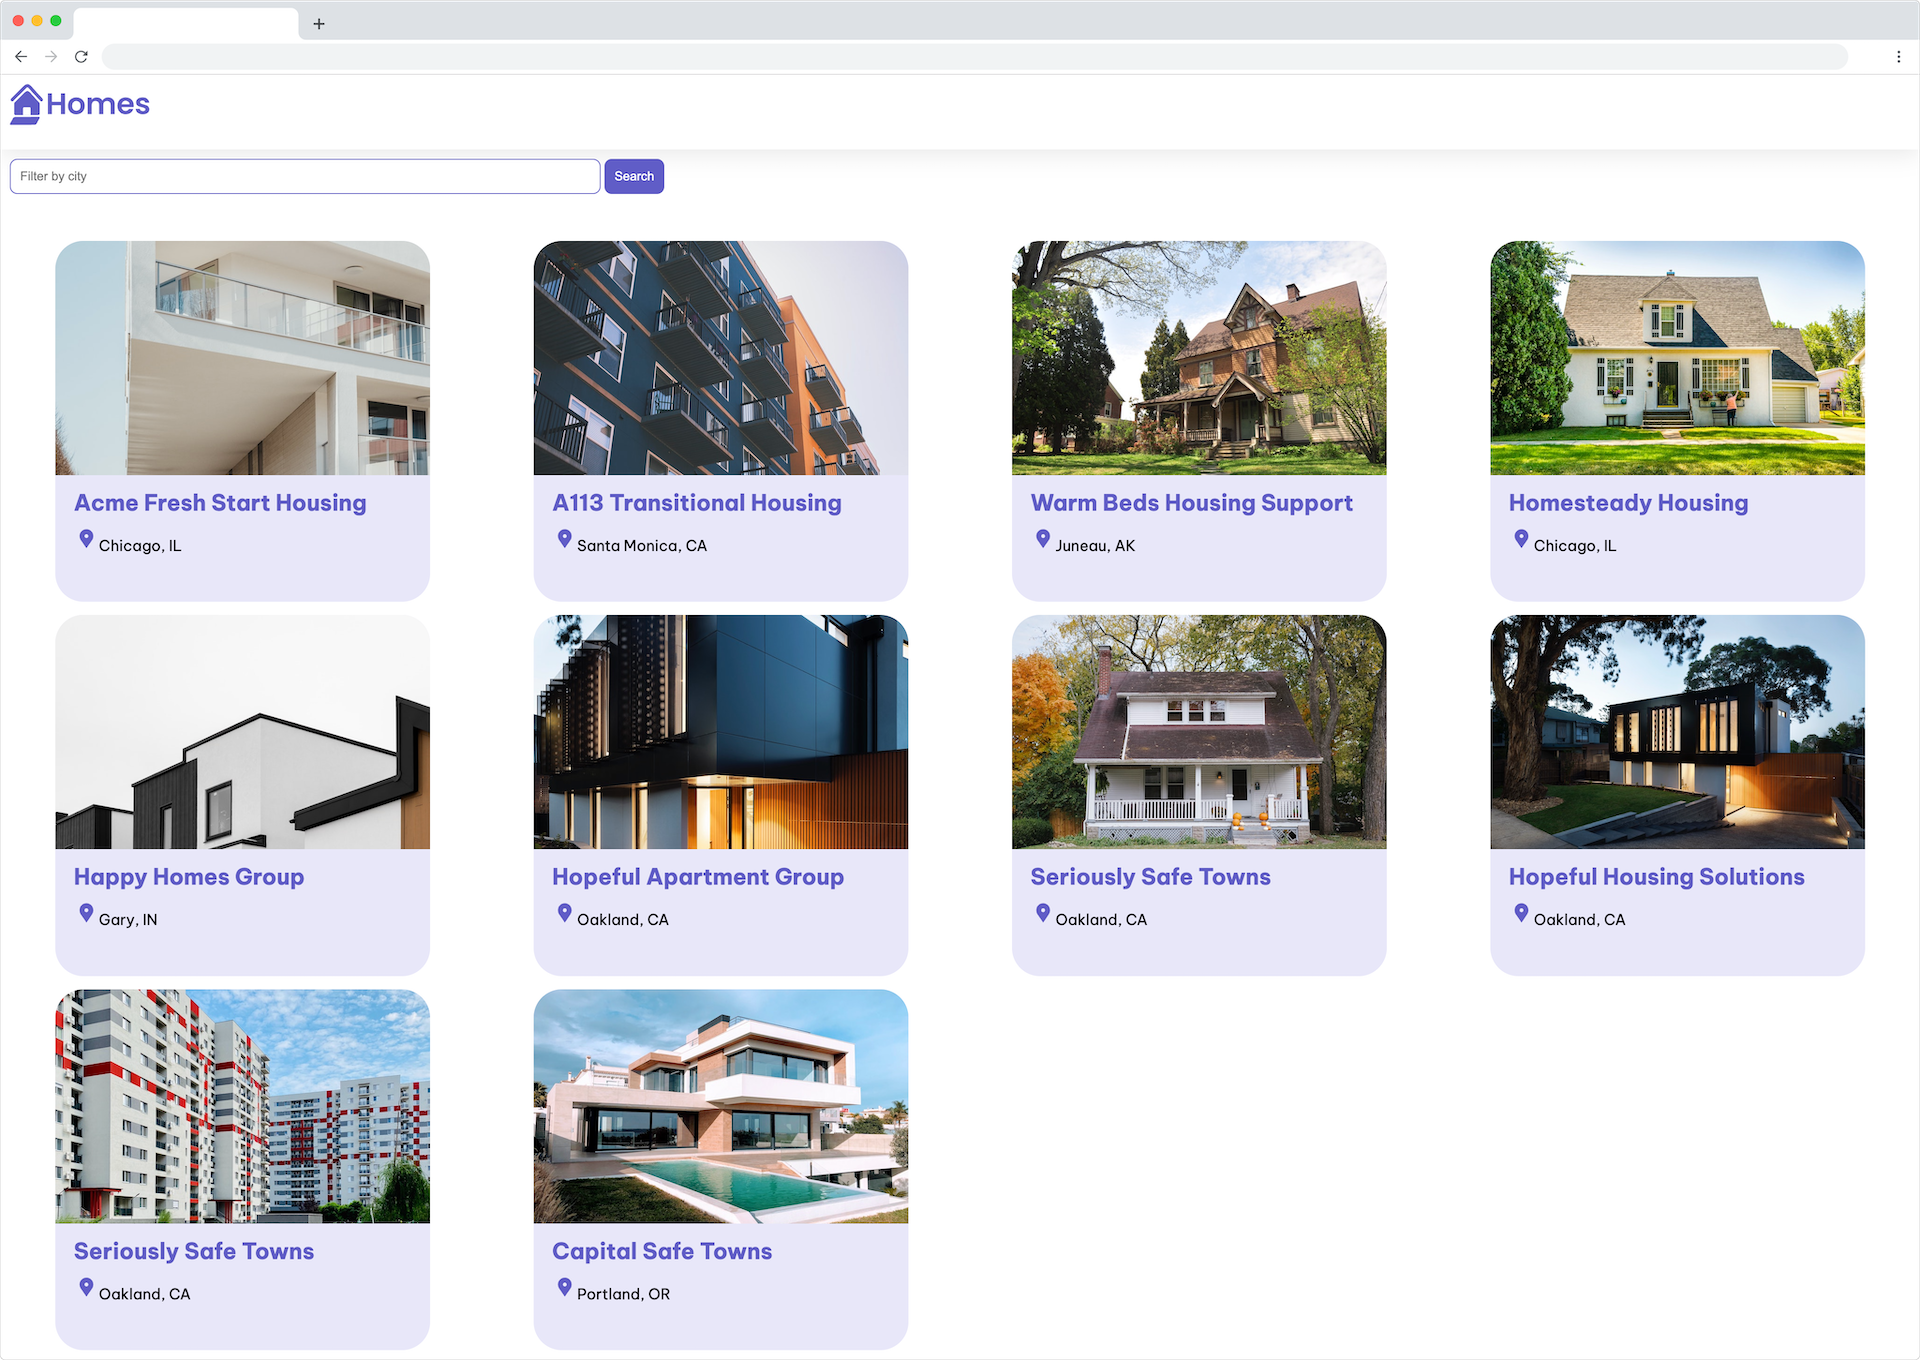 browser frame of homes-app displaying logo, filter text input box, search button and a grid of housing location cards